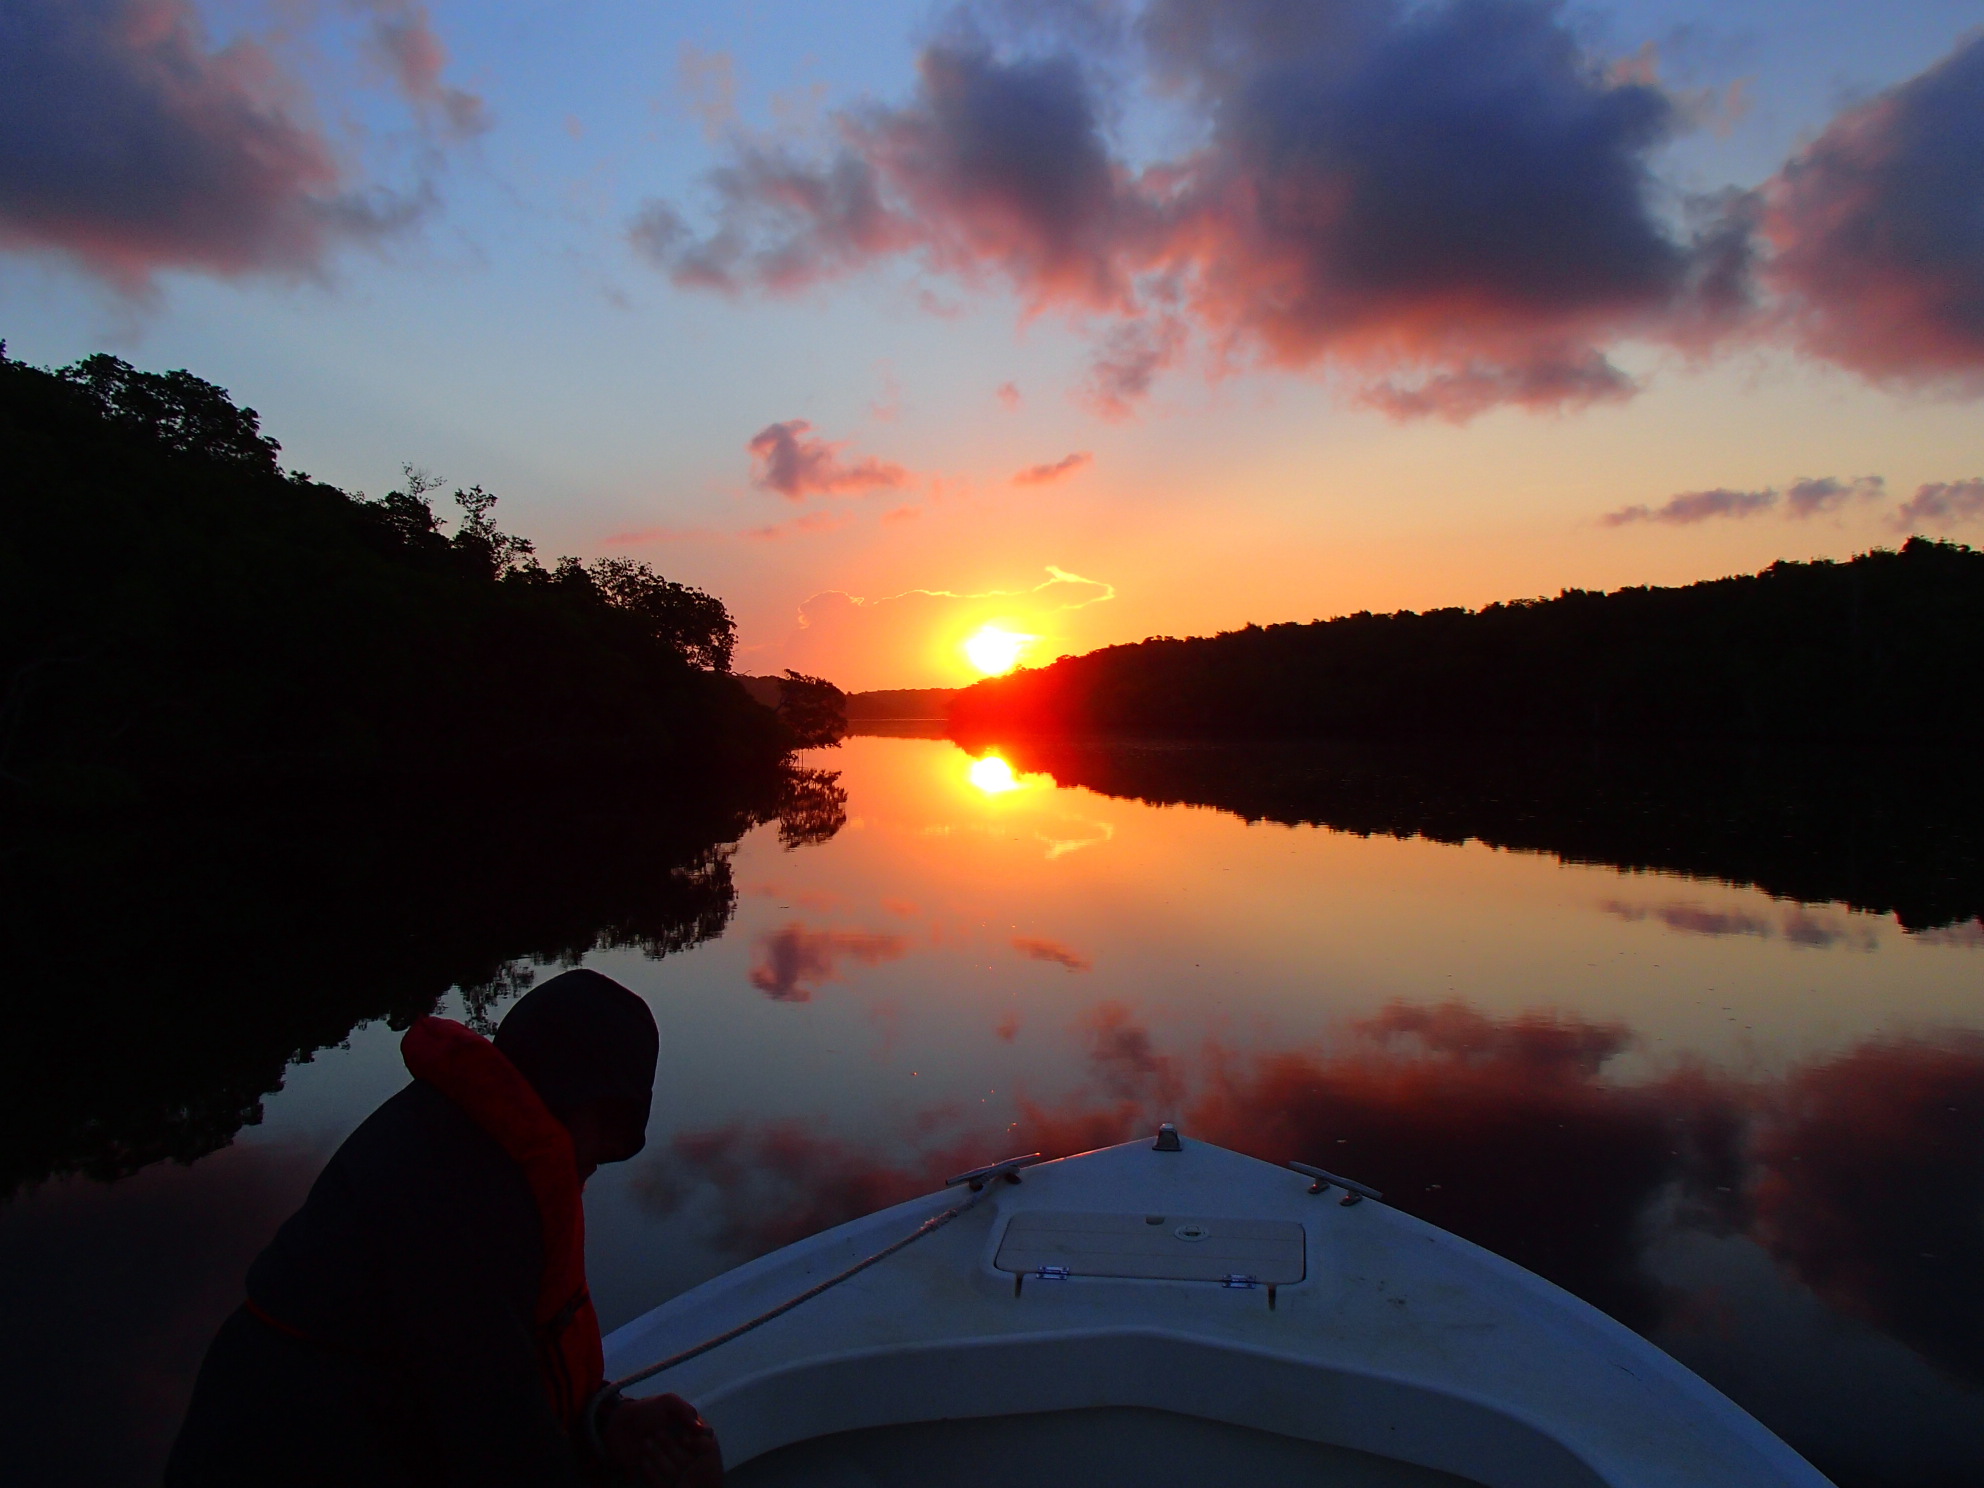 An FCE researcher looks out on a sunset over the Everglades